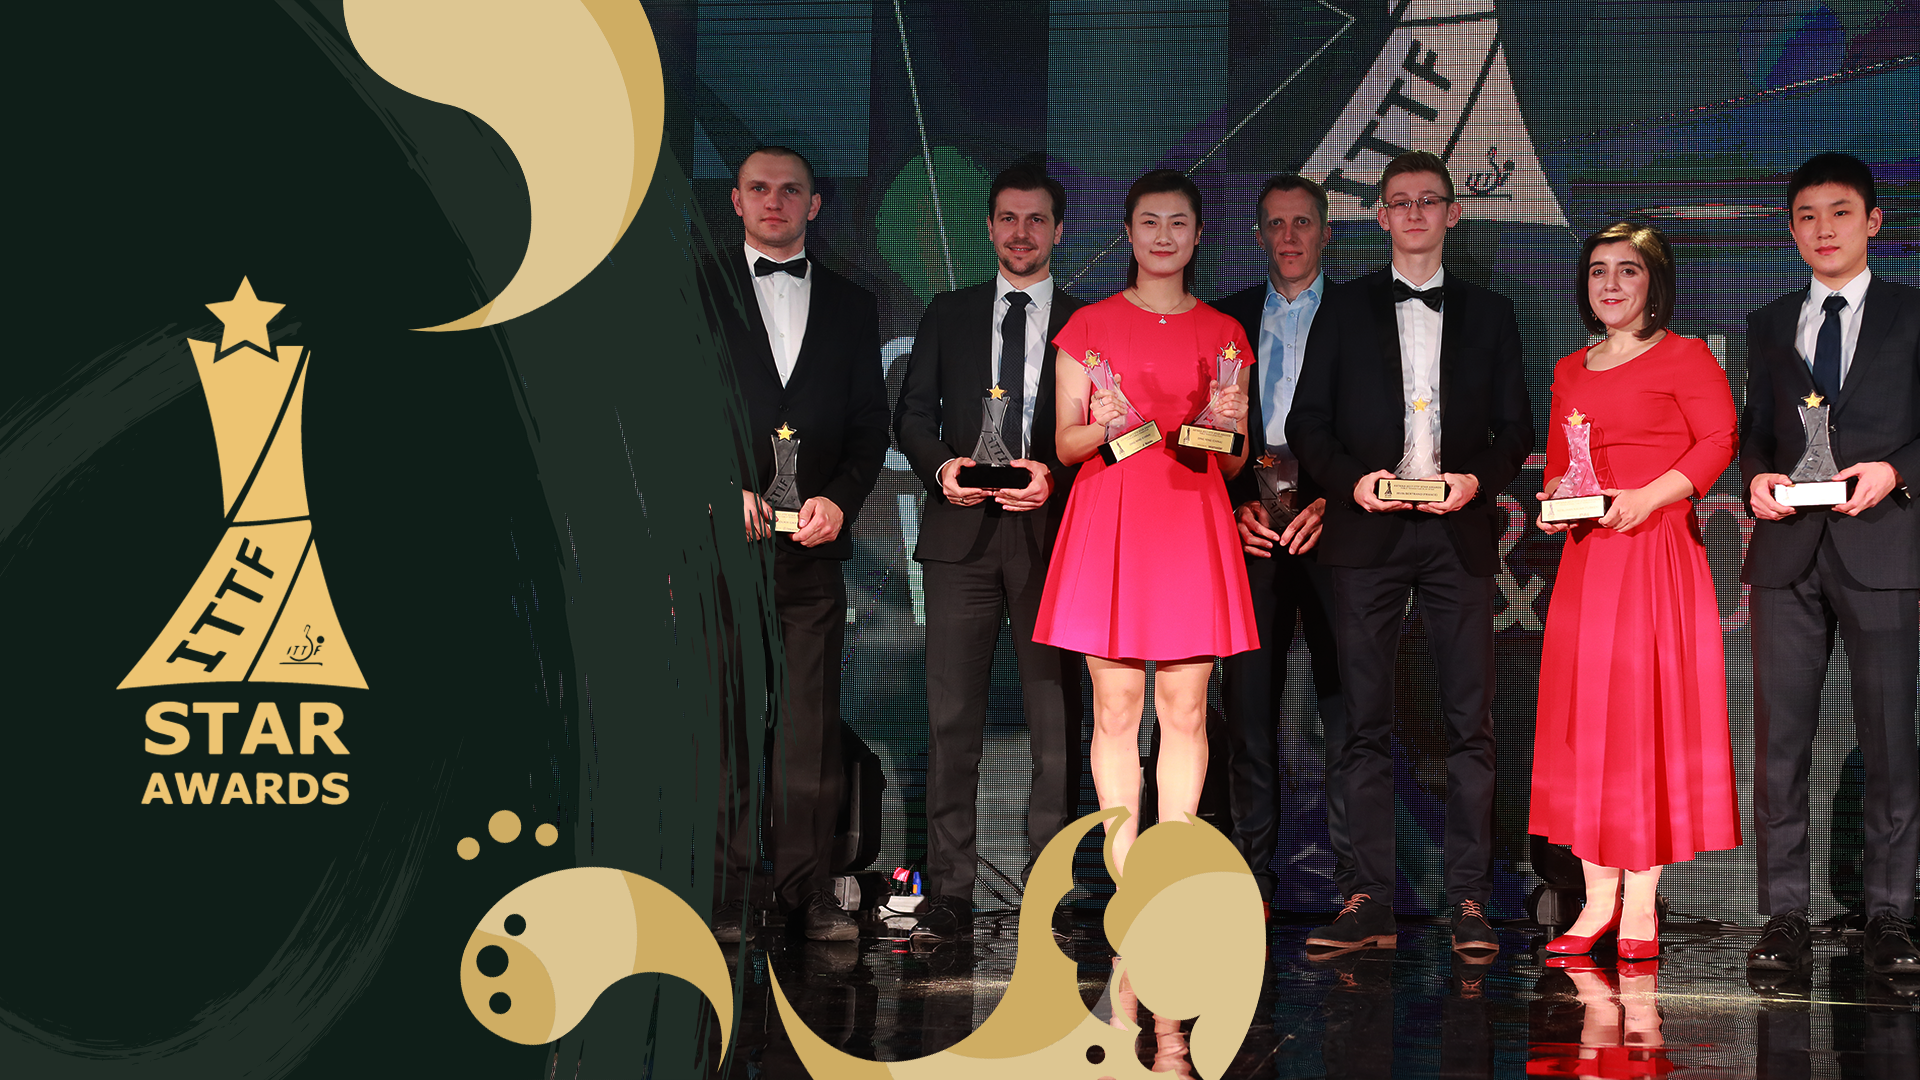 The International Table Tennis Federation have announced their nominees for the 2018 Star Awards ©ITTF